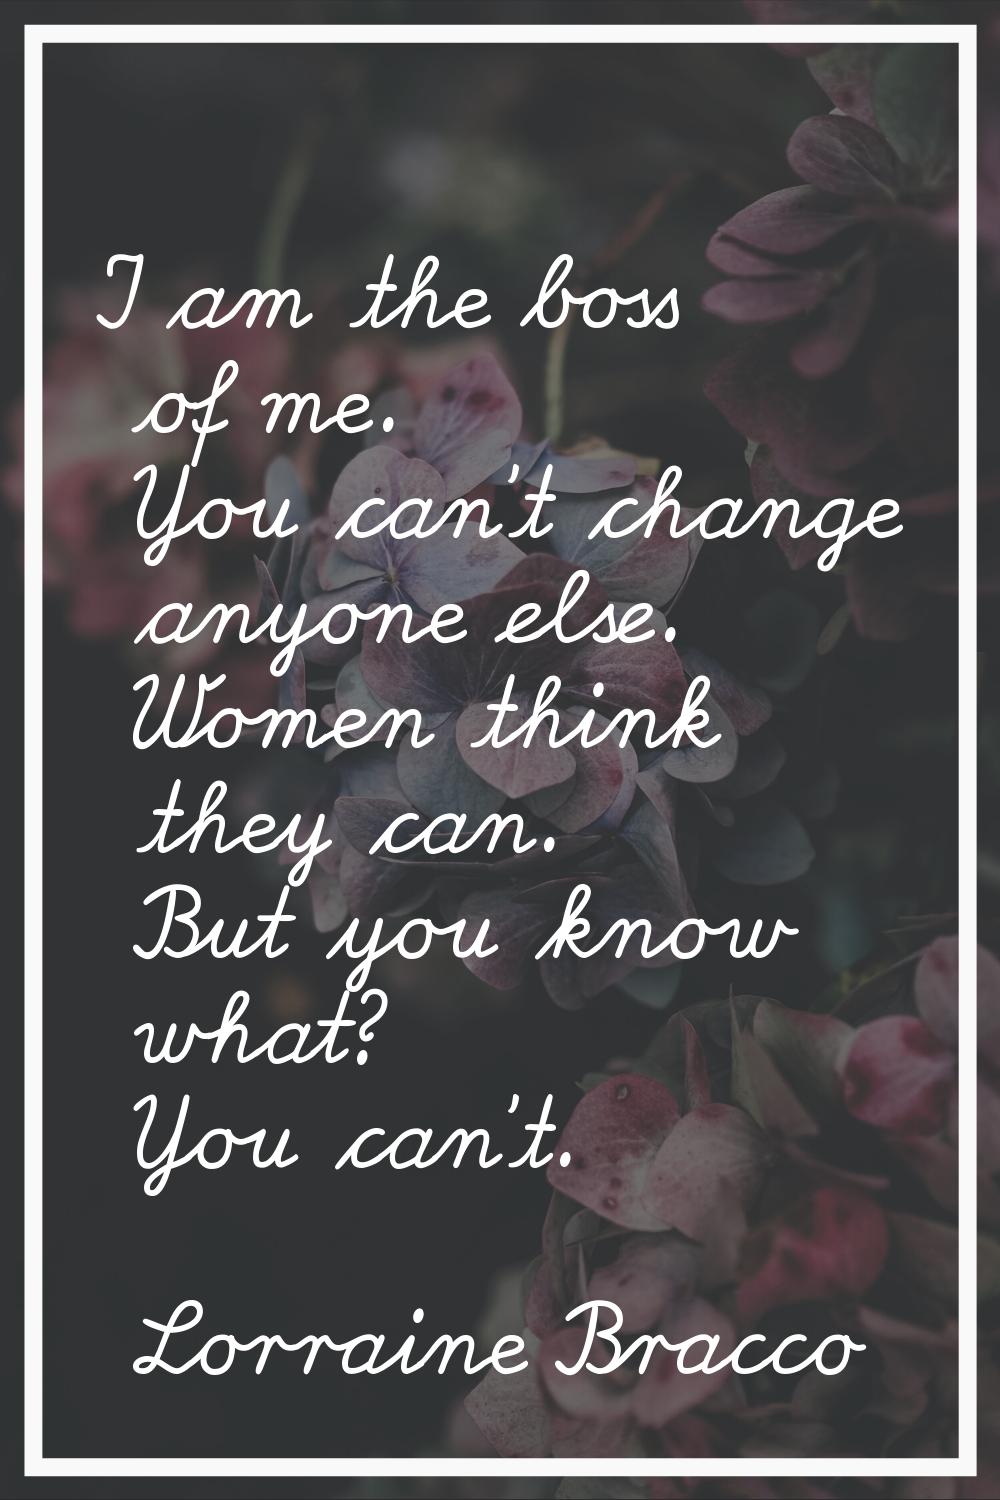 I am the boss of me. You can't change anyone else. Women think they can. But you know what? You can